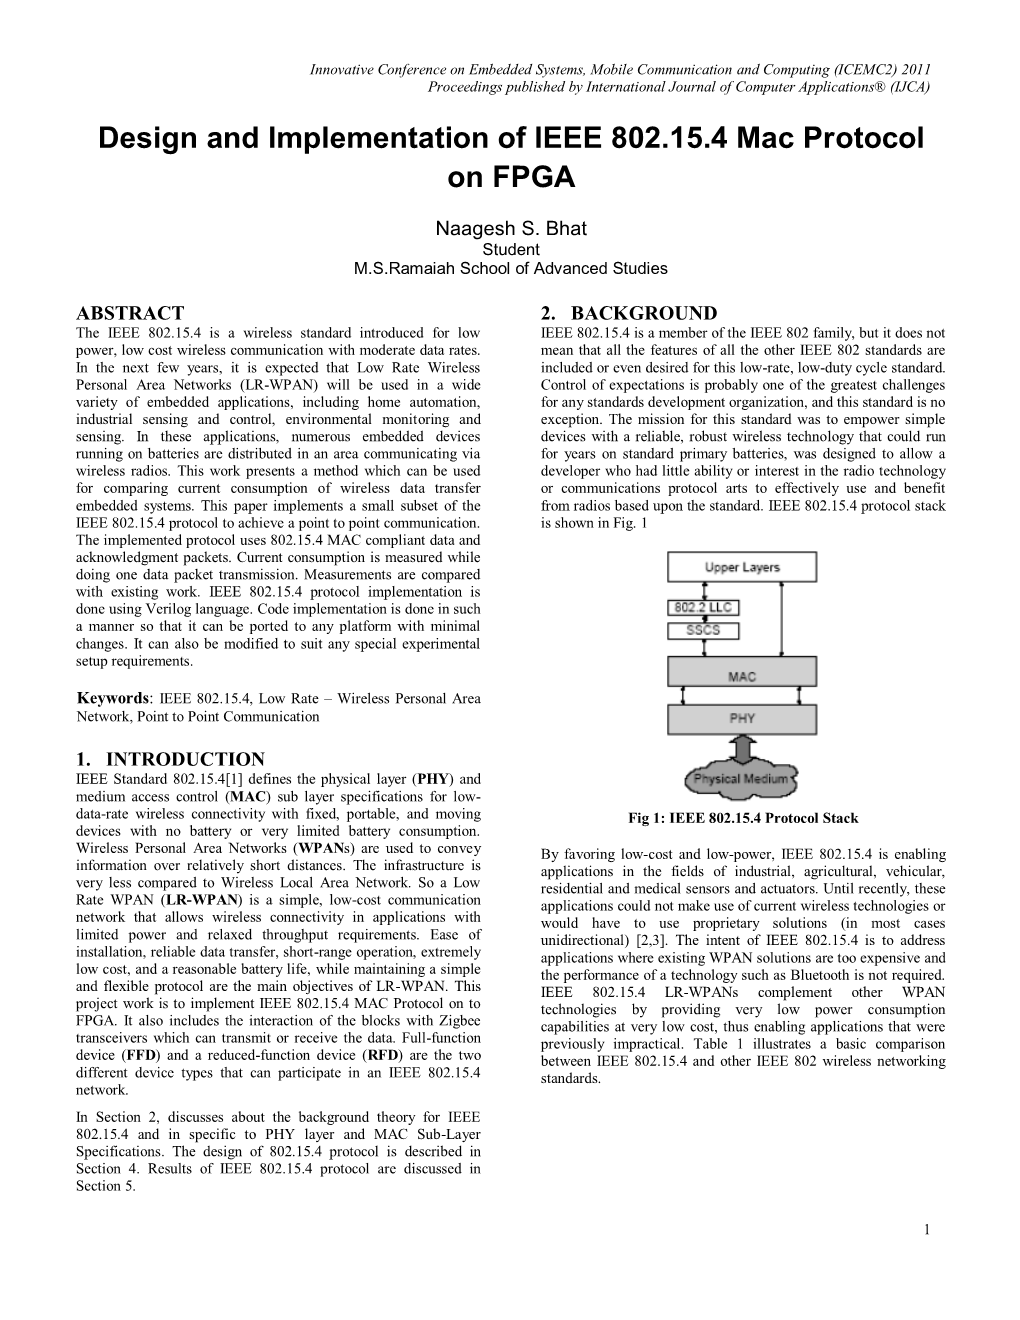 Design and Implementation of IEEE 802.15.4 Mac Protocol on FPGA